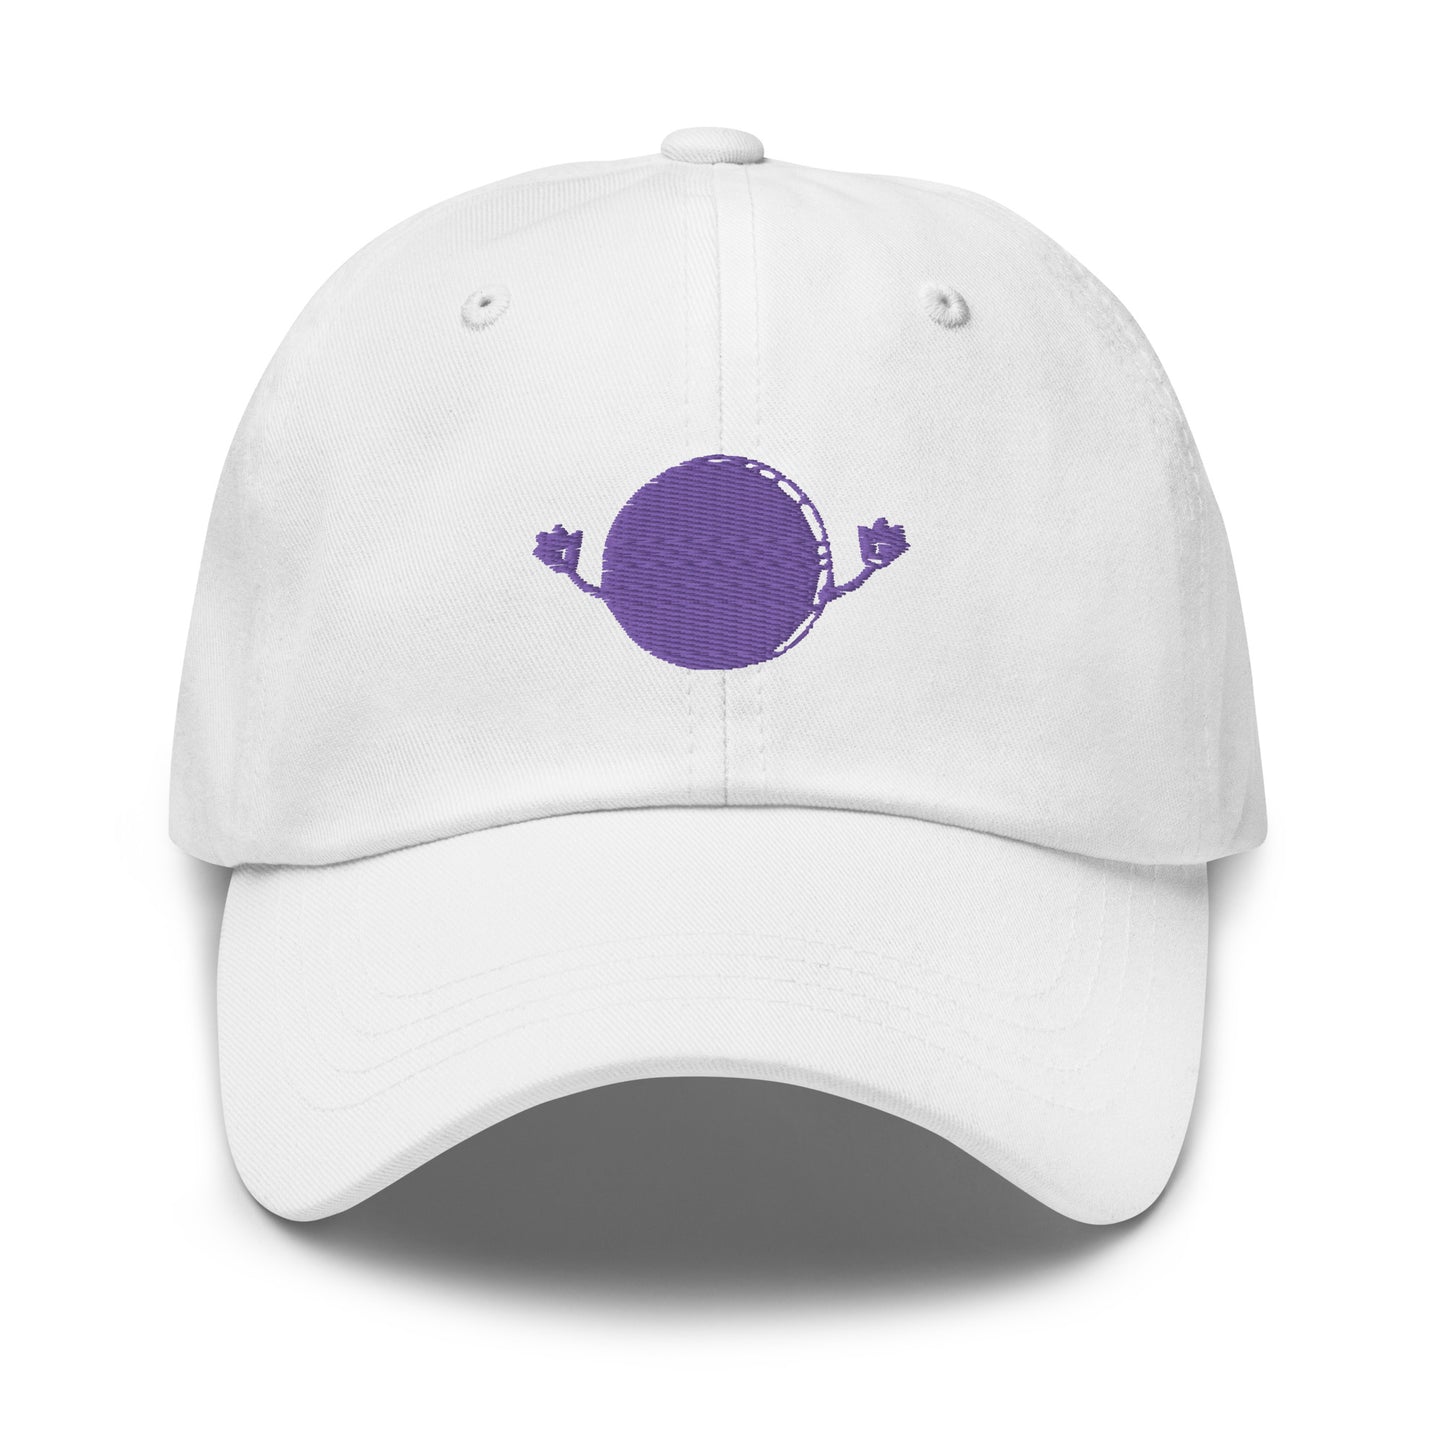 QSTN—Coin embroidery cap